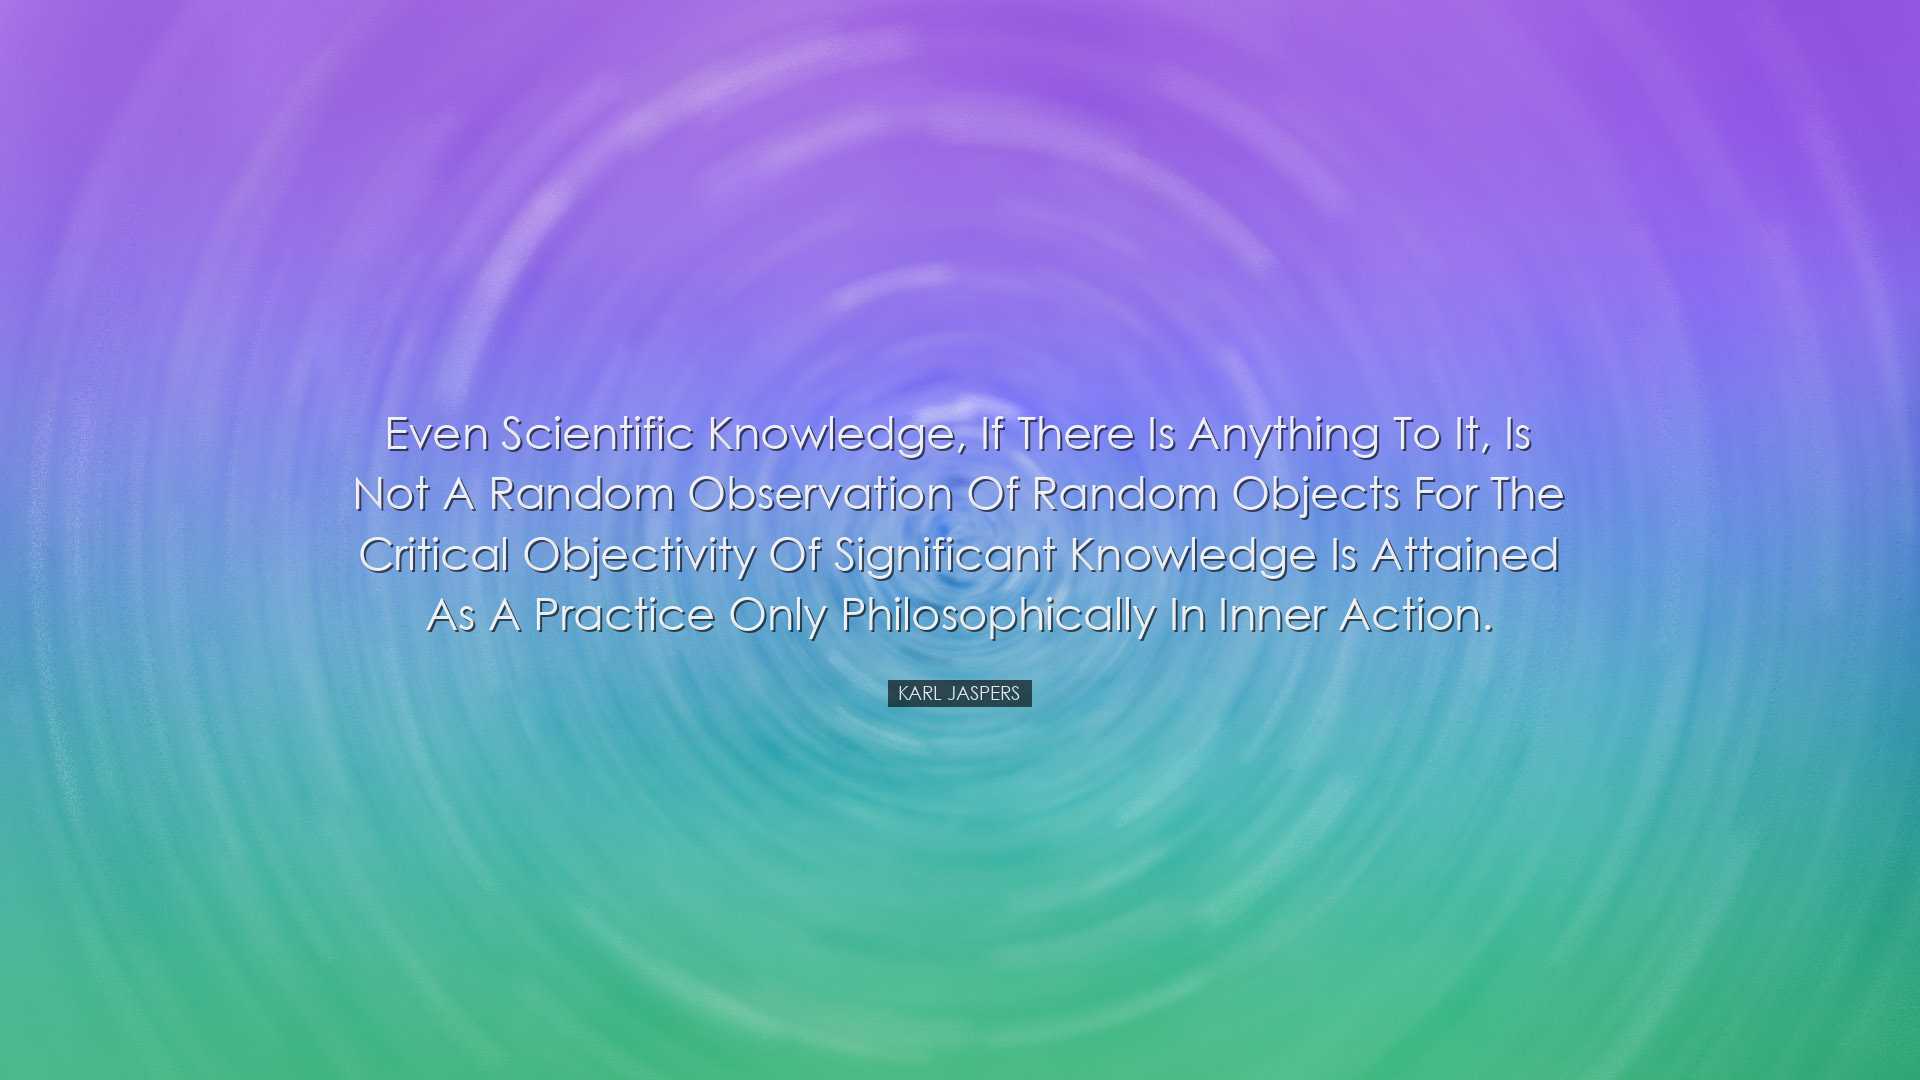 Even scientific knowledge, if there is anything to it, is not a ra